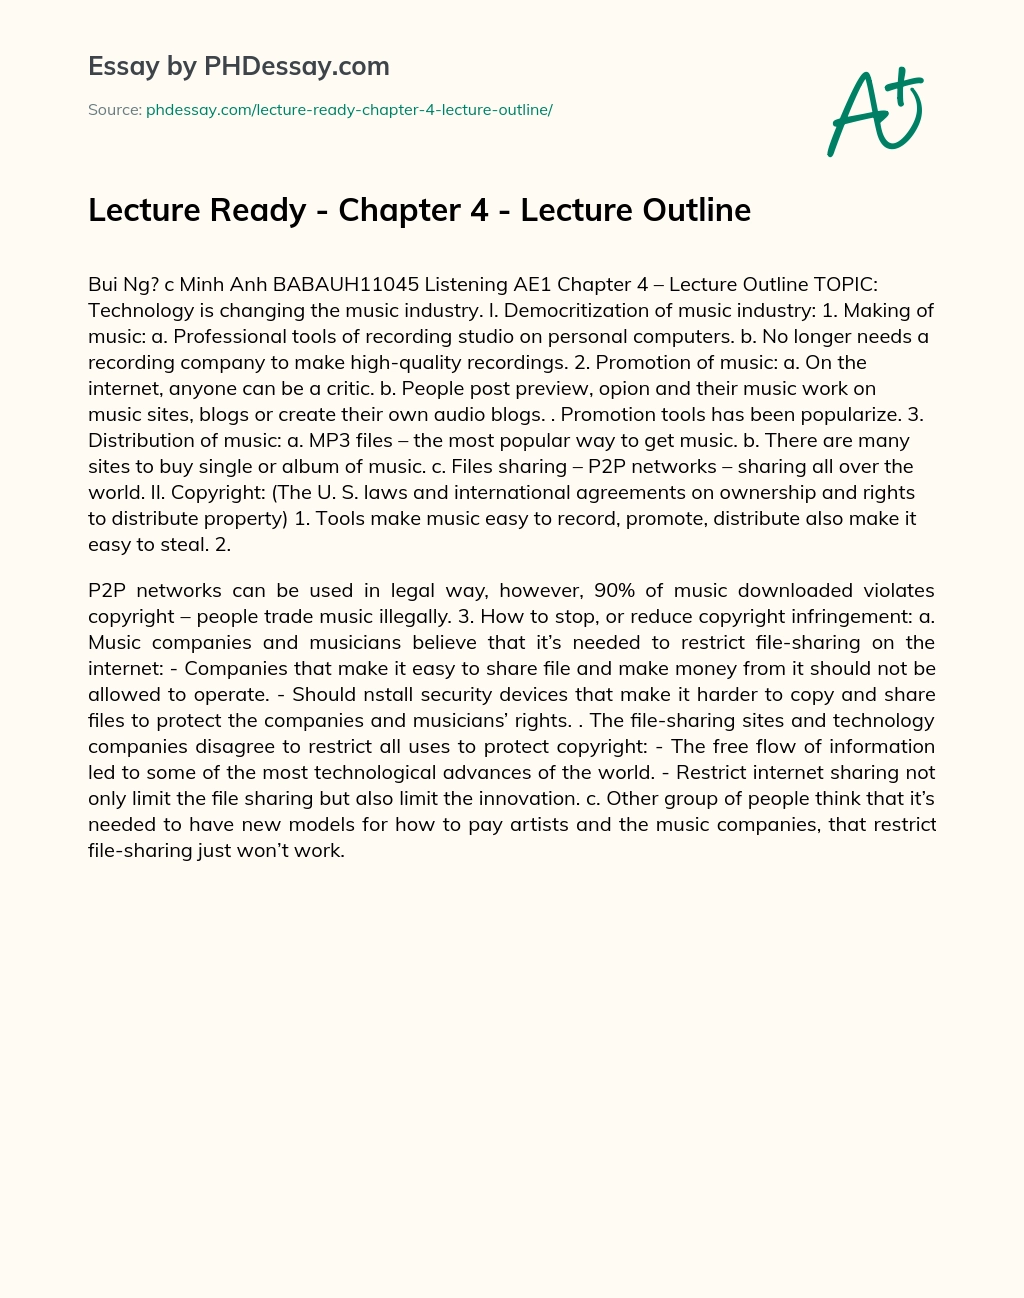 Lecture Ready – Chapter 4 – Lecture Outline essay